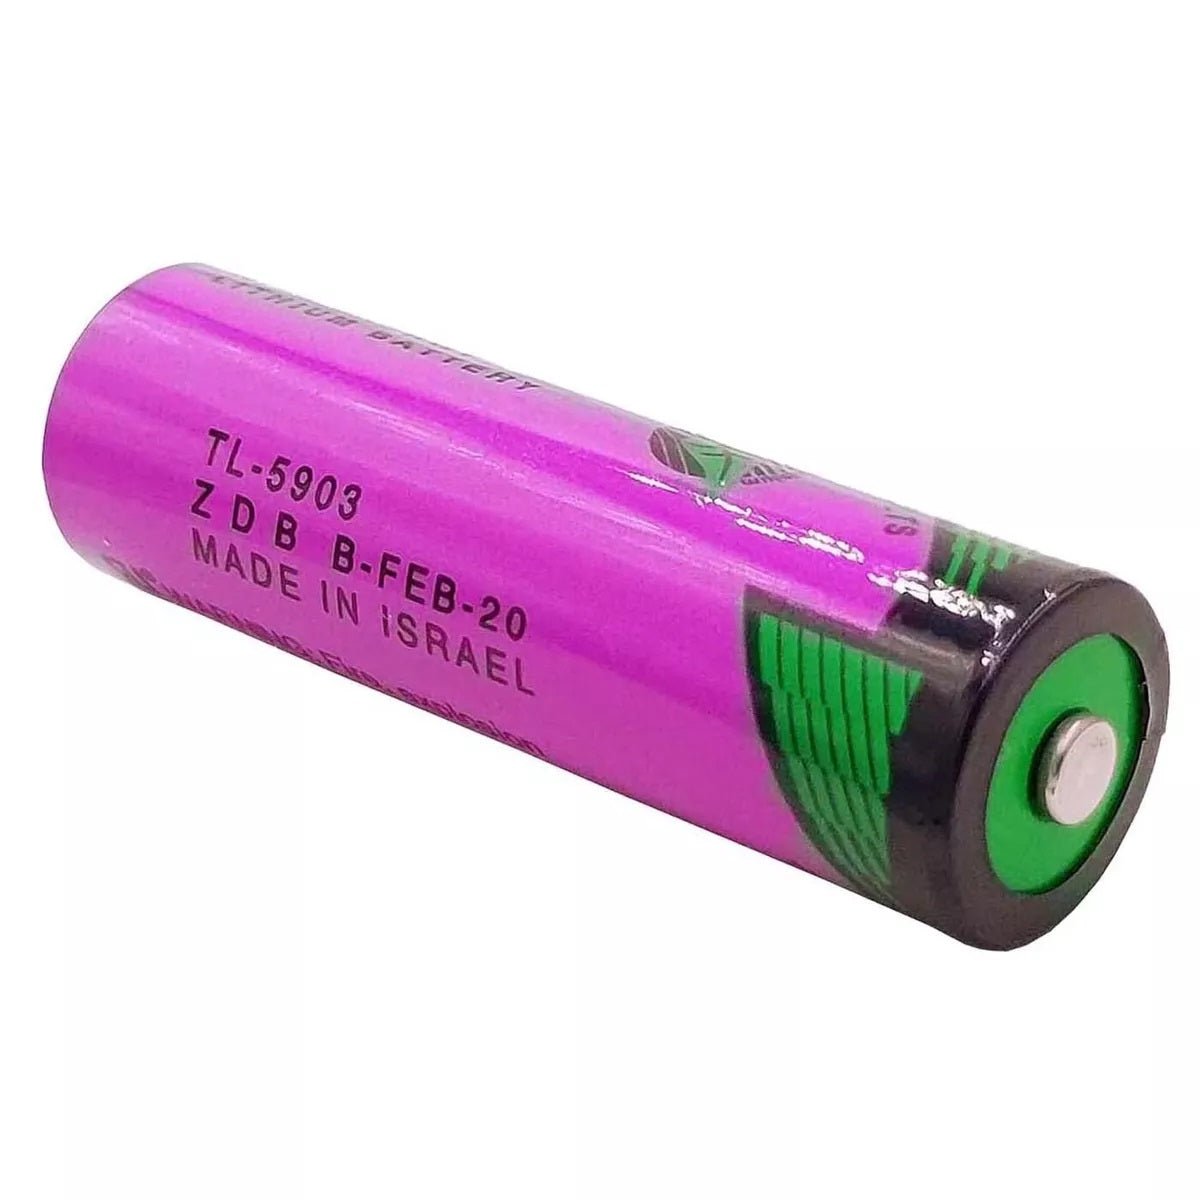 Tadiran Tl-5903, Tl5104, Aa 3.6v Aa Lithium Battery (er14505) 3.6v - Non Rechargeable Battery By Use Tadiran Batteries   